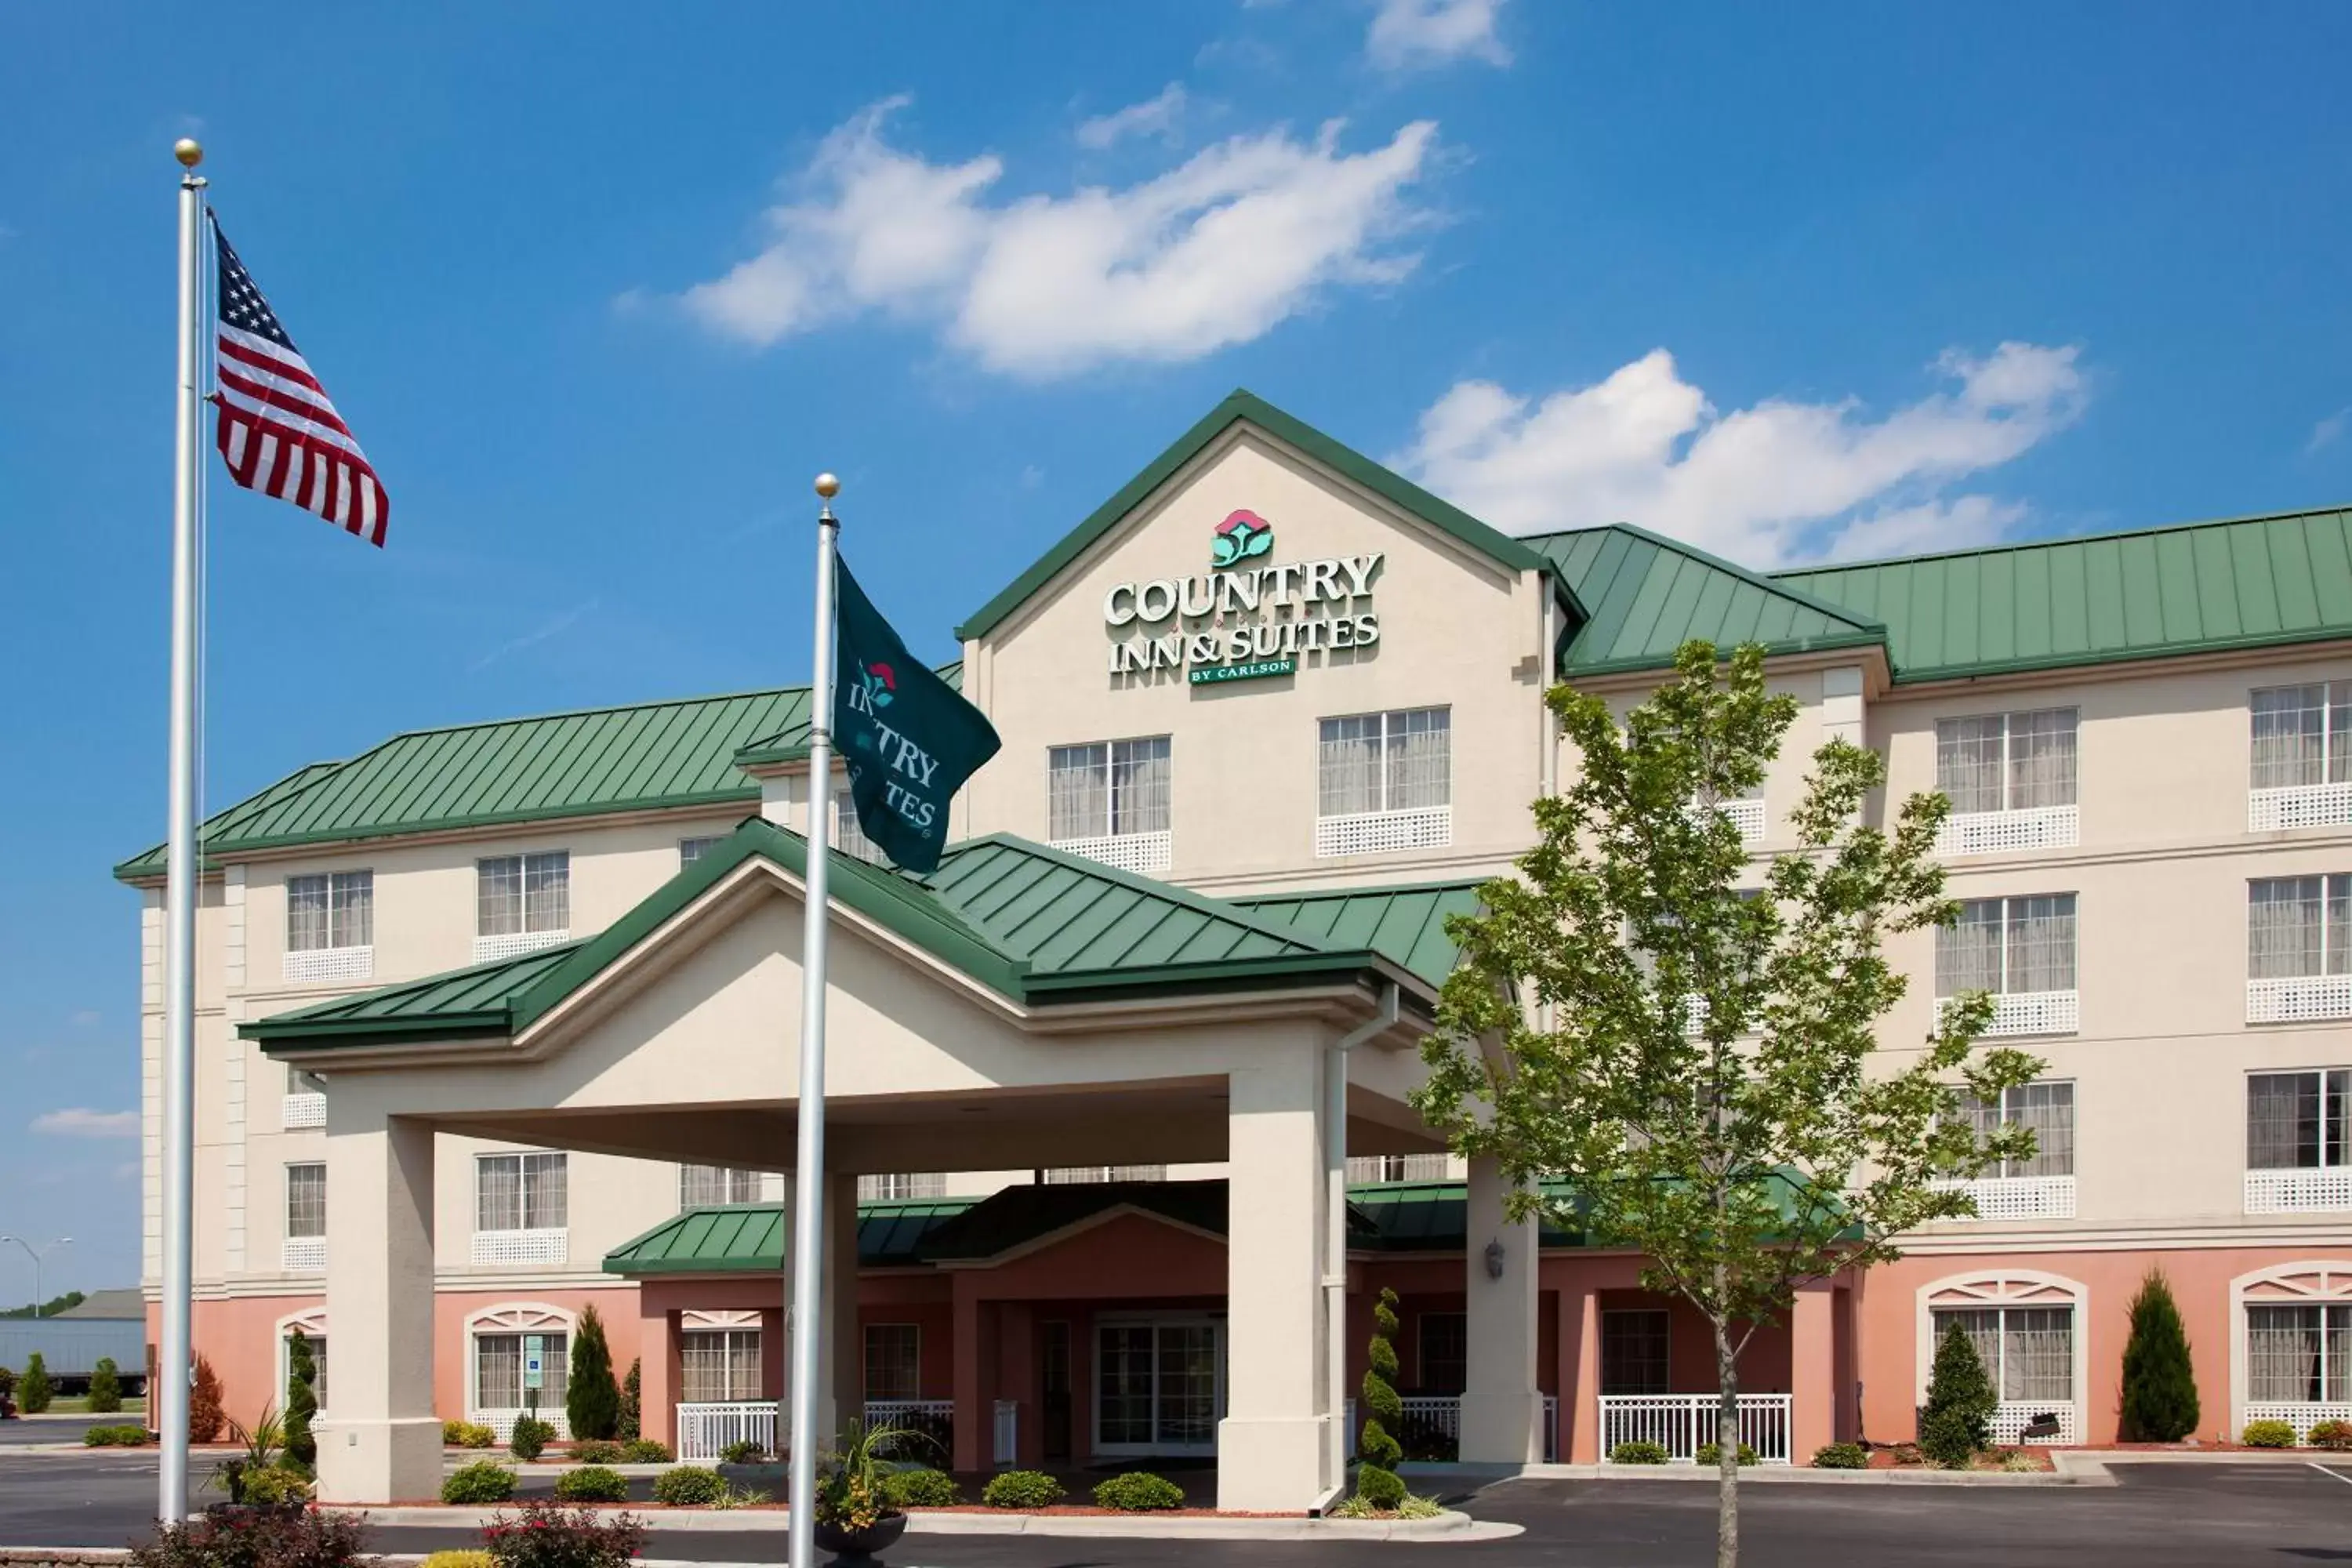 Bird's eye view, Property Building in Country Inn & Suites by Radisson, Goldsboro, NC